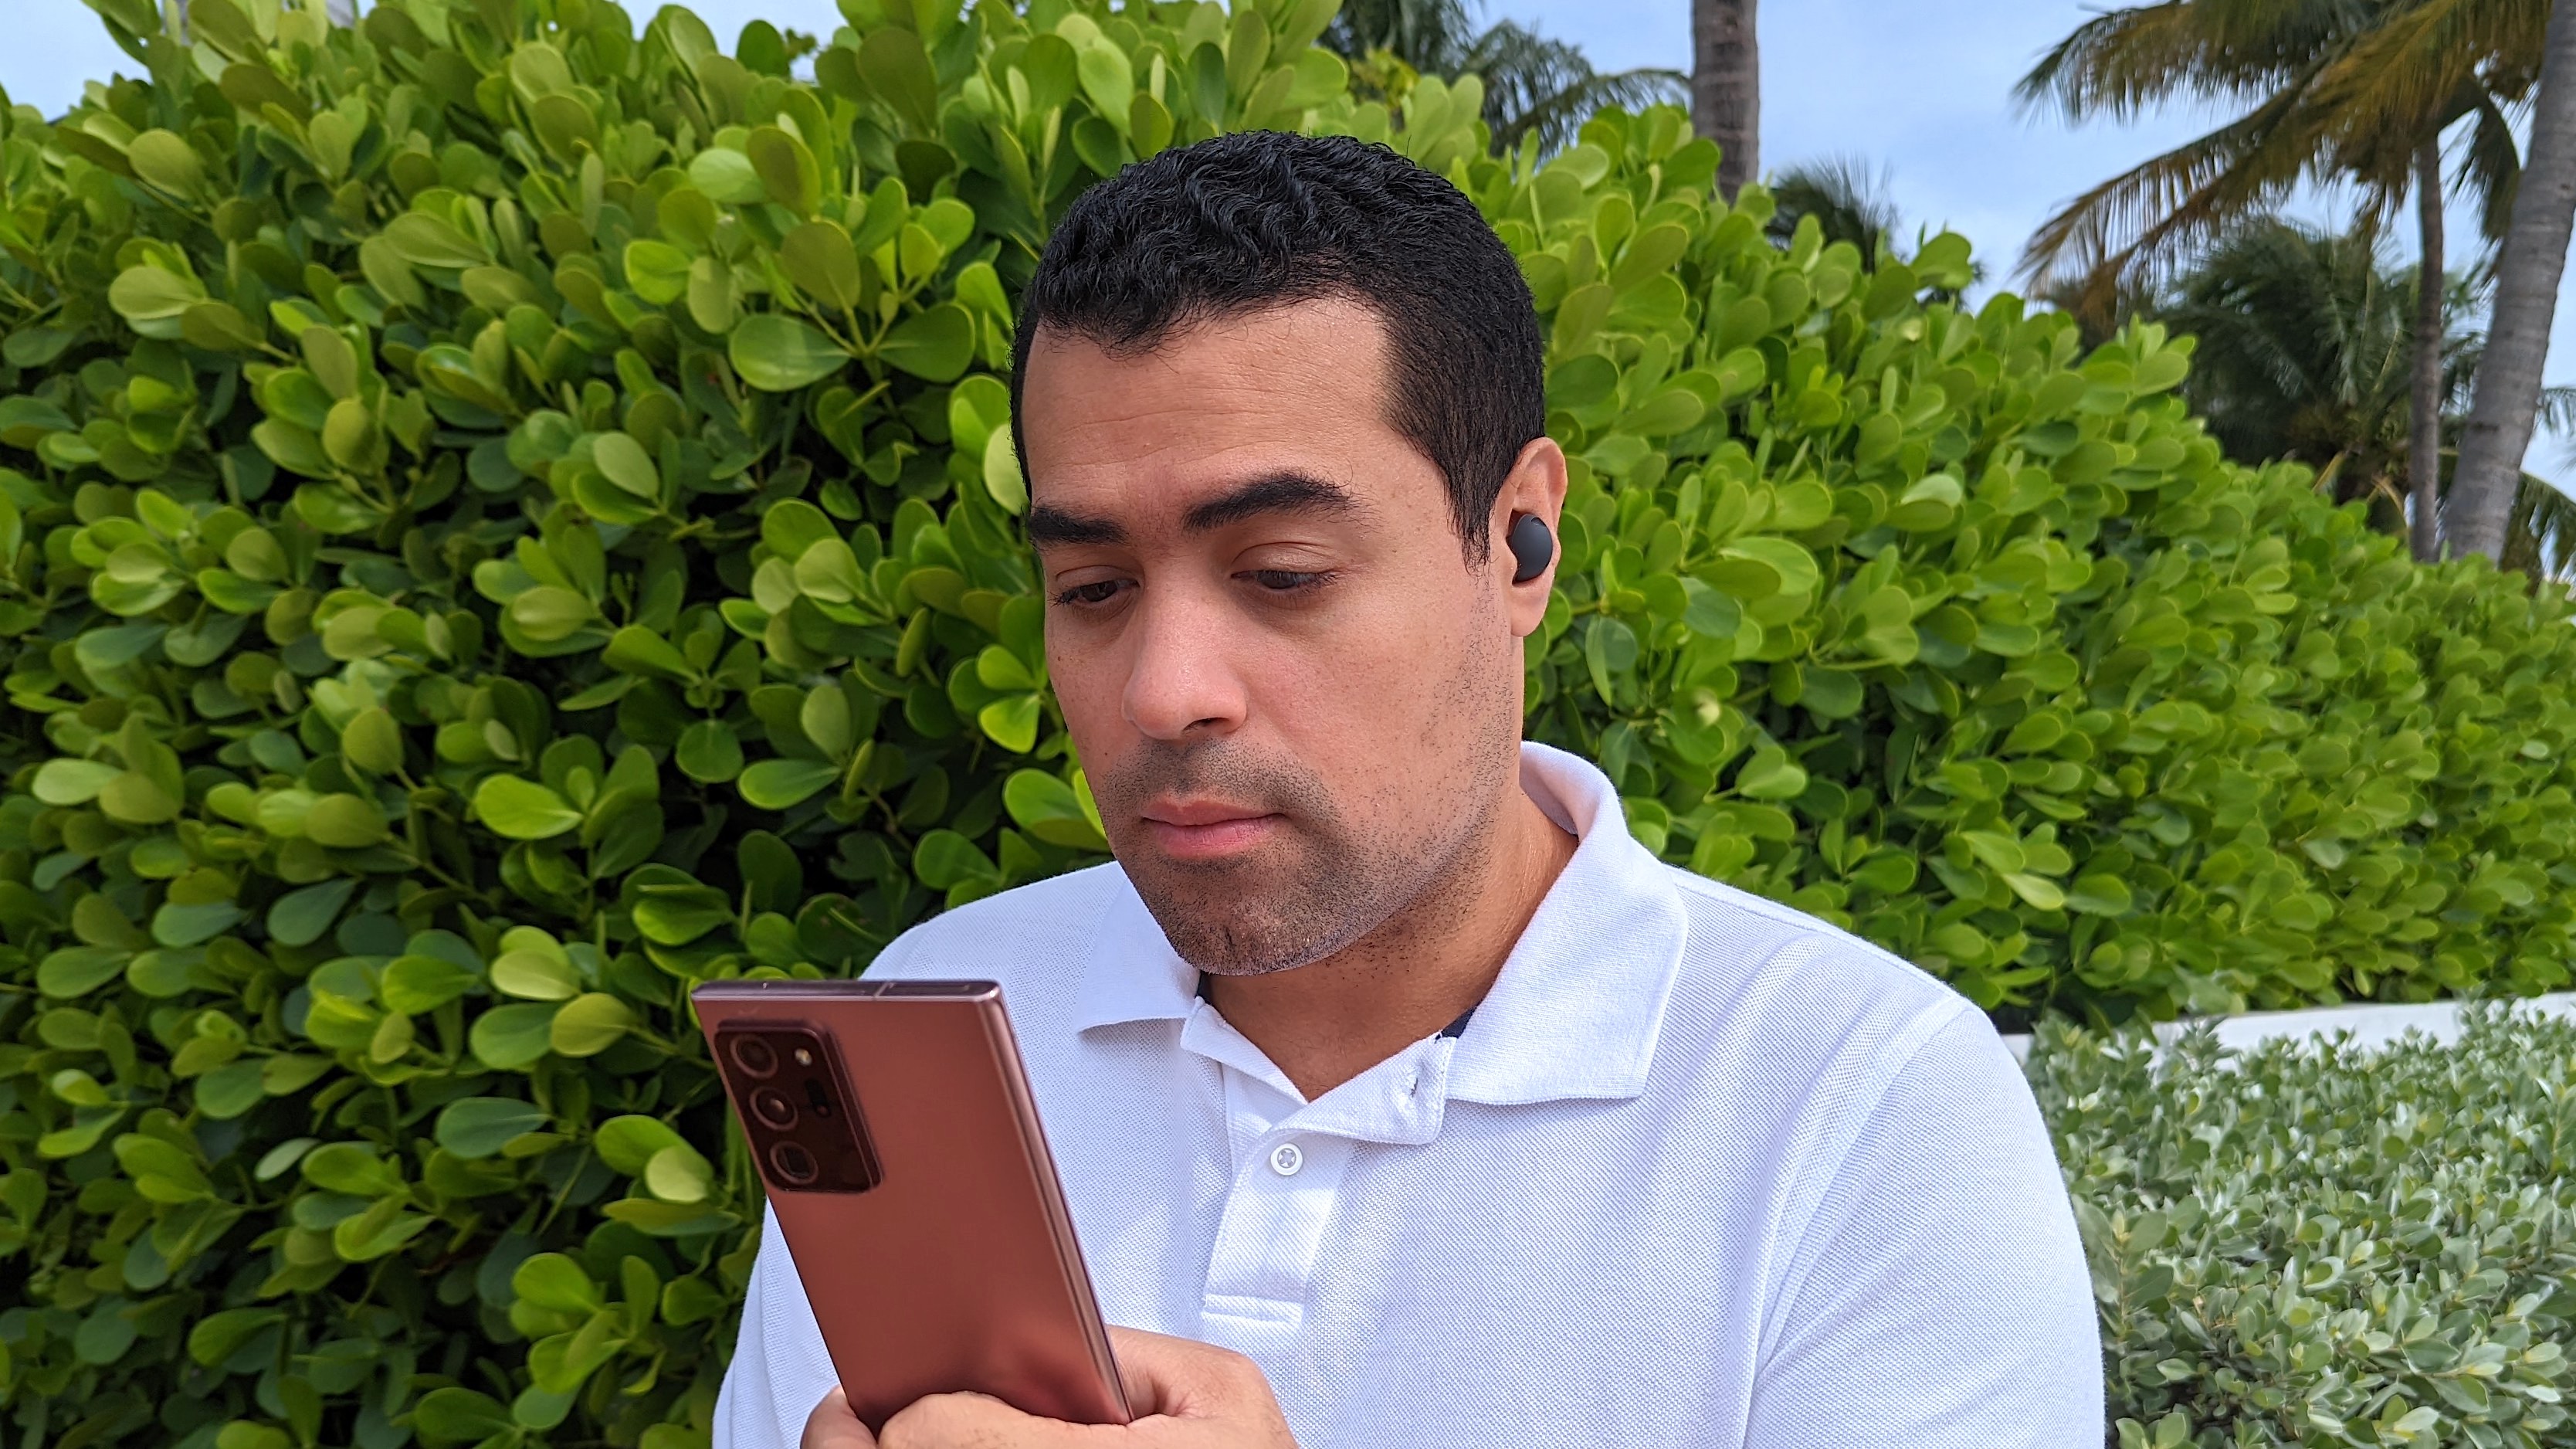 Our reviewer using the Samsung Galaxy Buds 2 Pro to take a video call